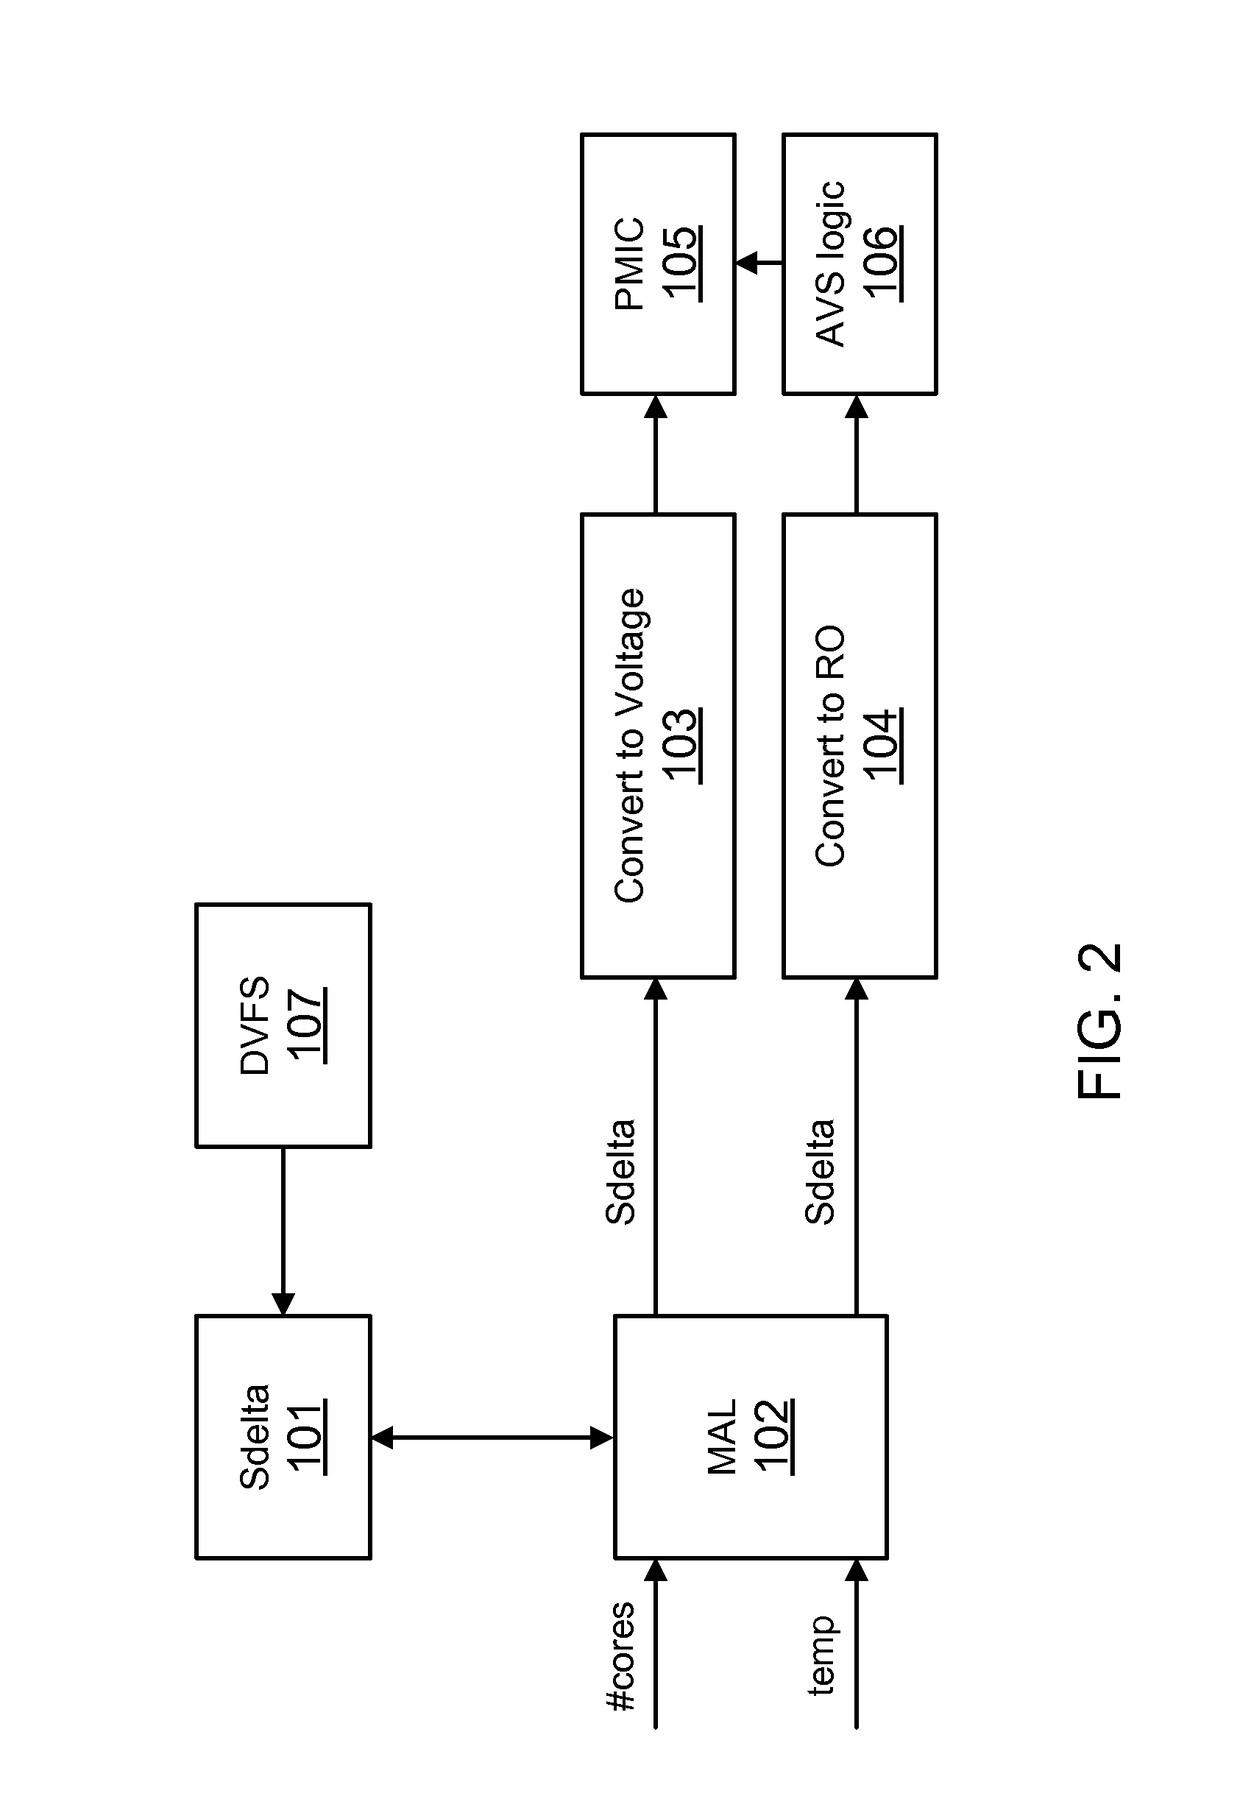 Circuits and methods providing voltage adjustment as processor cores become active